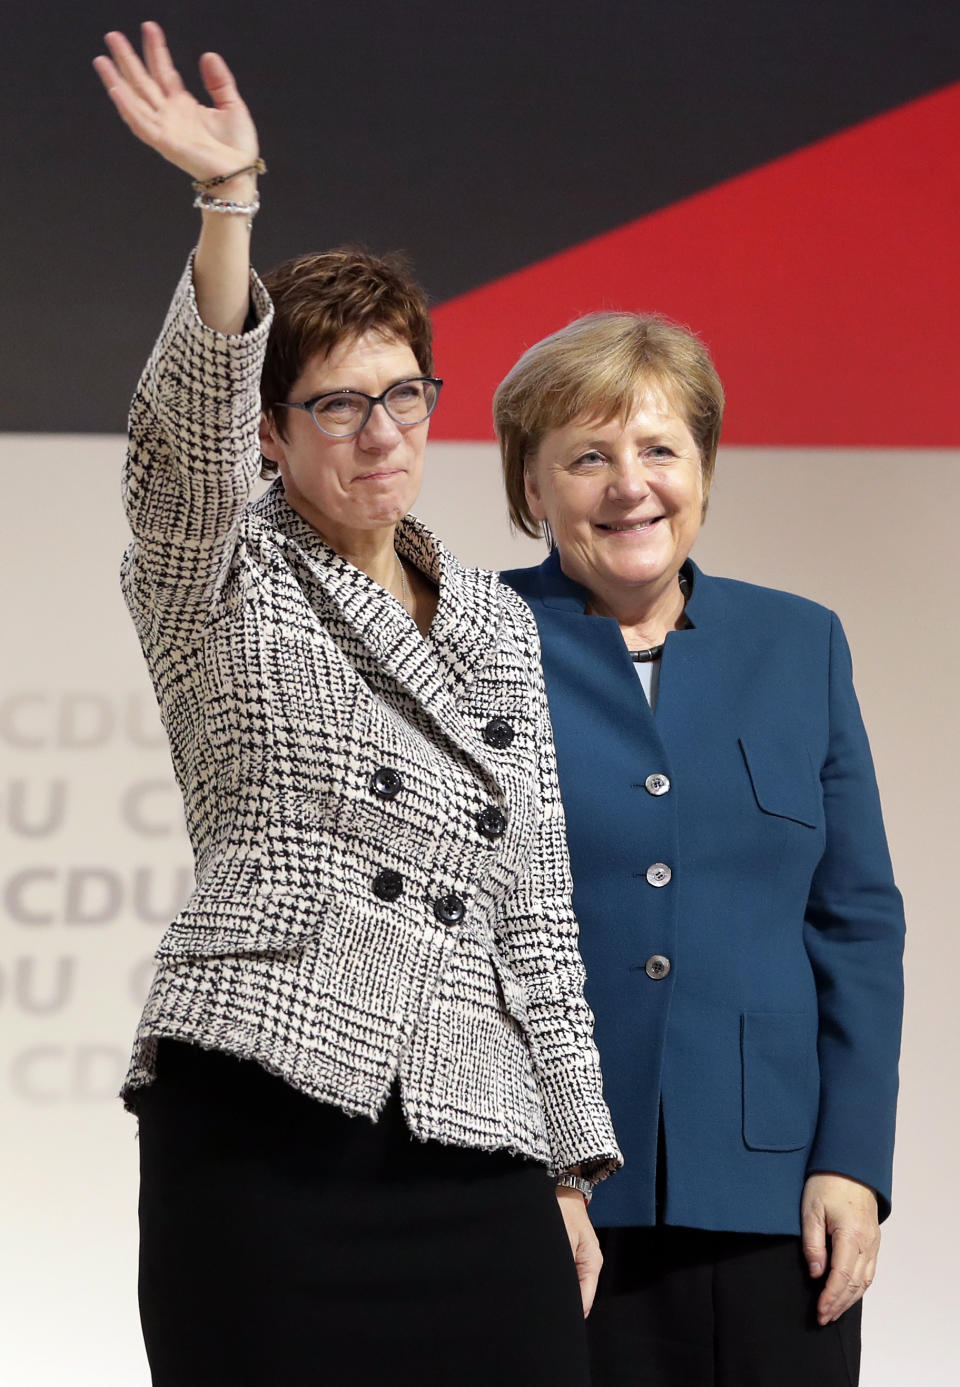 Newly elected CDU chairwoman Annegret Kramp-Karrenbauer, left, is flanked by German Chancellor Angela Merkel, right, as she waves during the party convention of the Christian Democratic Party CDU in Hamburg, Germany, Friday, Dec. 7, 2018, after German Chancellor Angela Merkel didn't run again for party chairmanship after more than 18 years at the helm of the party. (AP Photo/Michael Sohn)